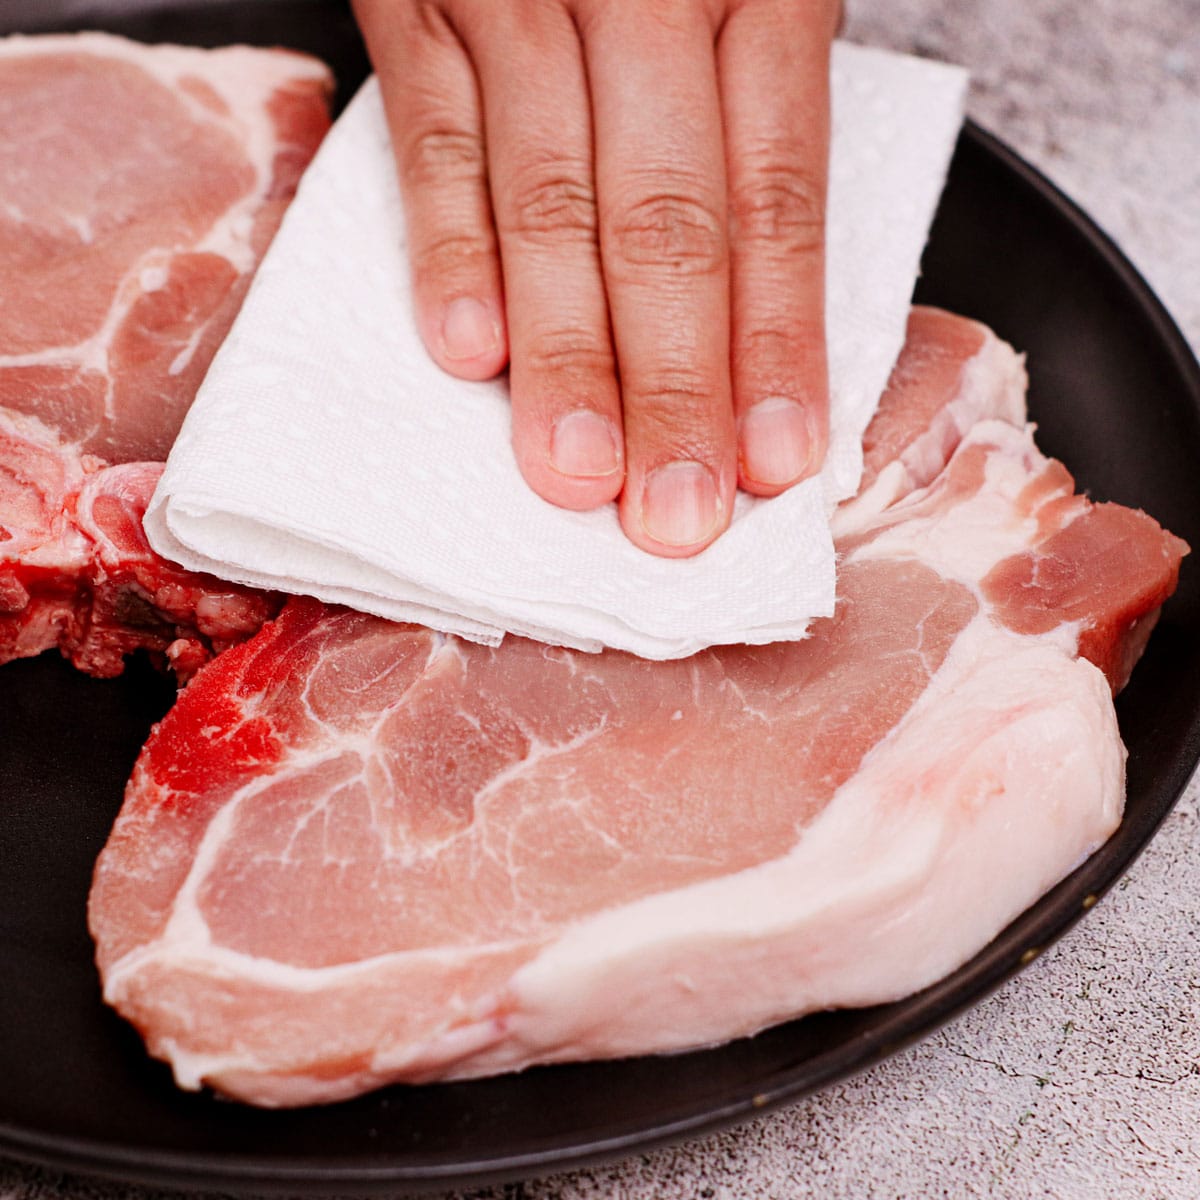 Patting pork chops dry with kitchen towel